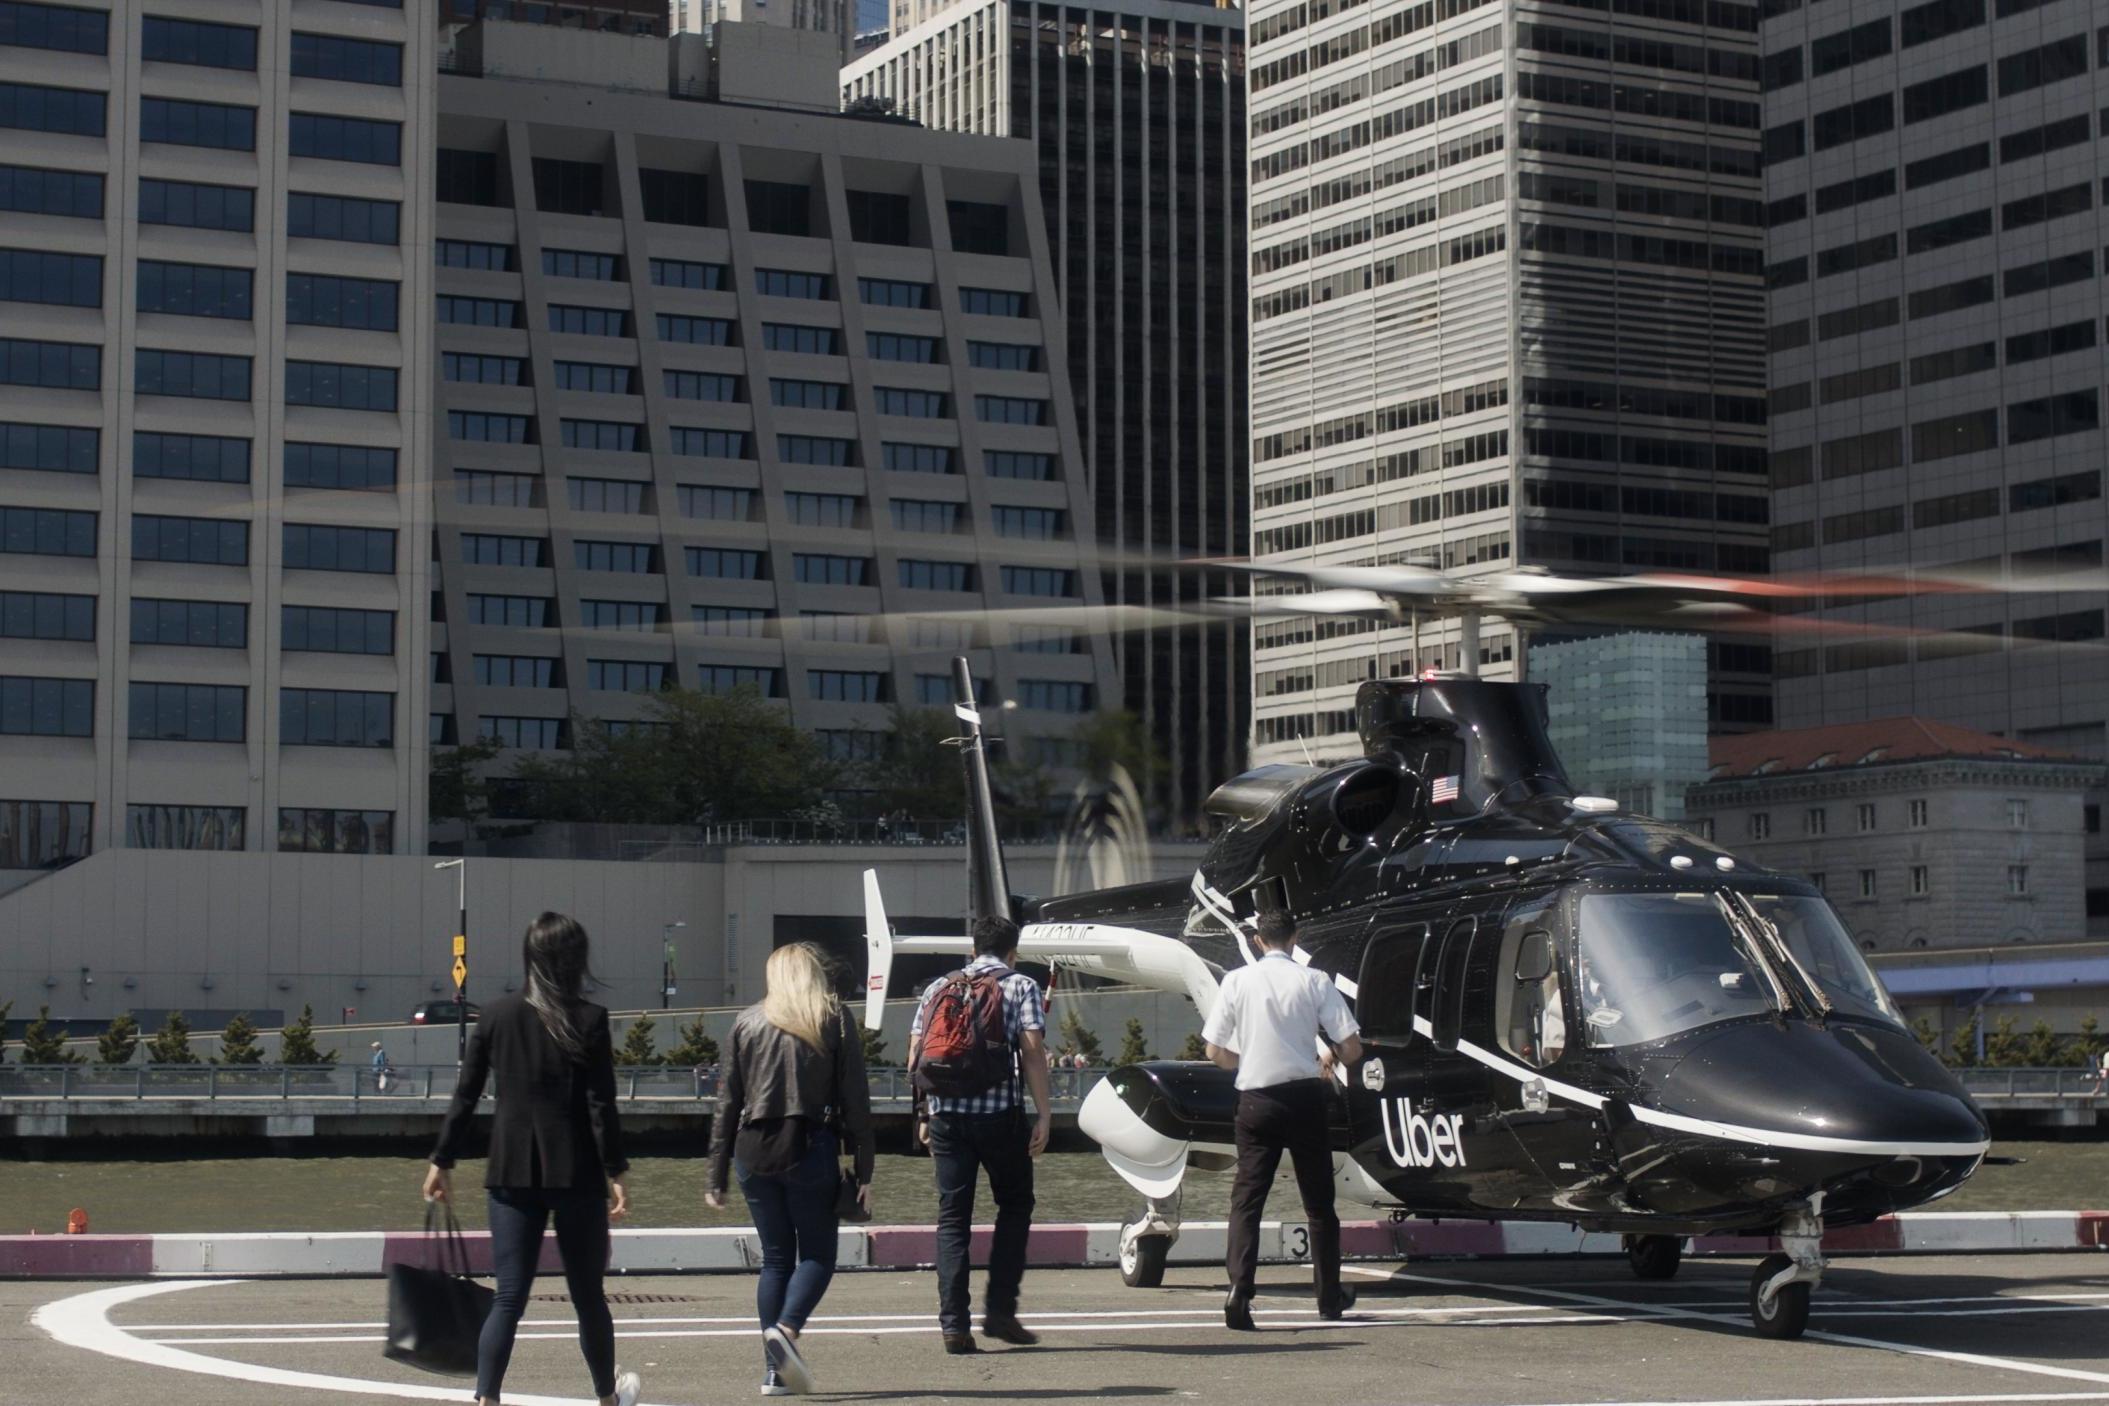 The Uber Copter will begin operation in New York on 9 July 2019